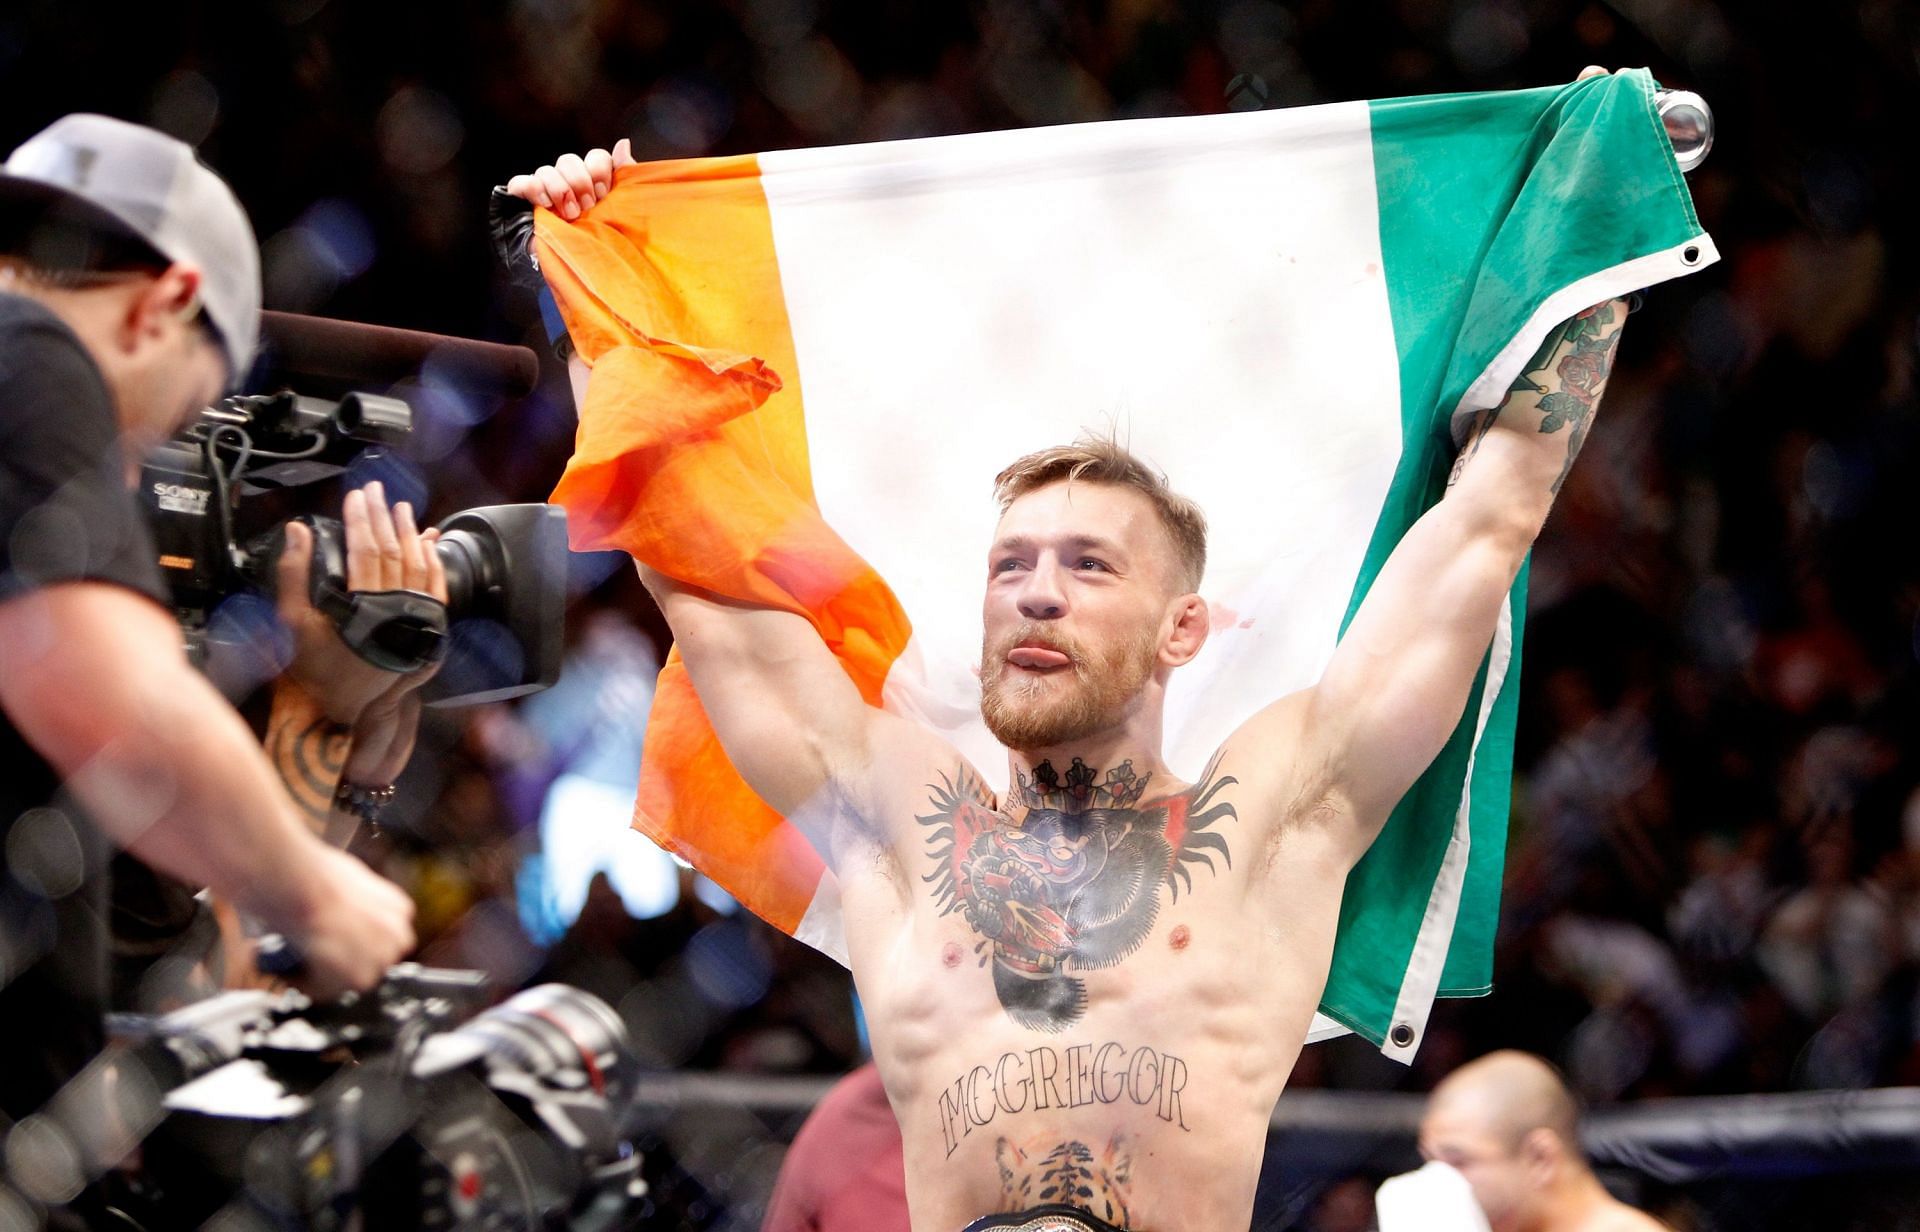 Conor. McGregor defeated Jose Aldo to become the new featherweight champion